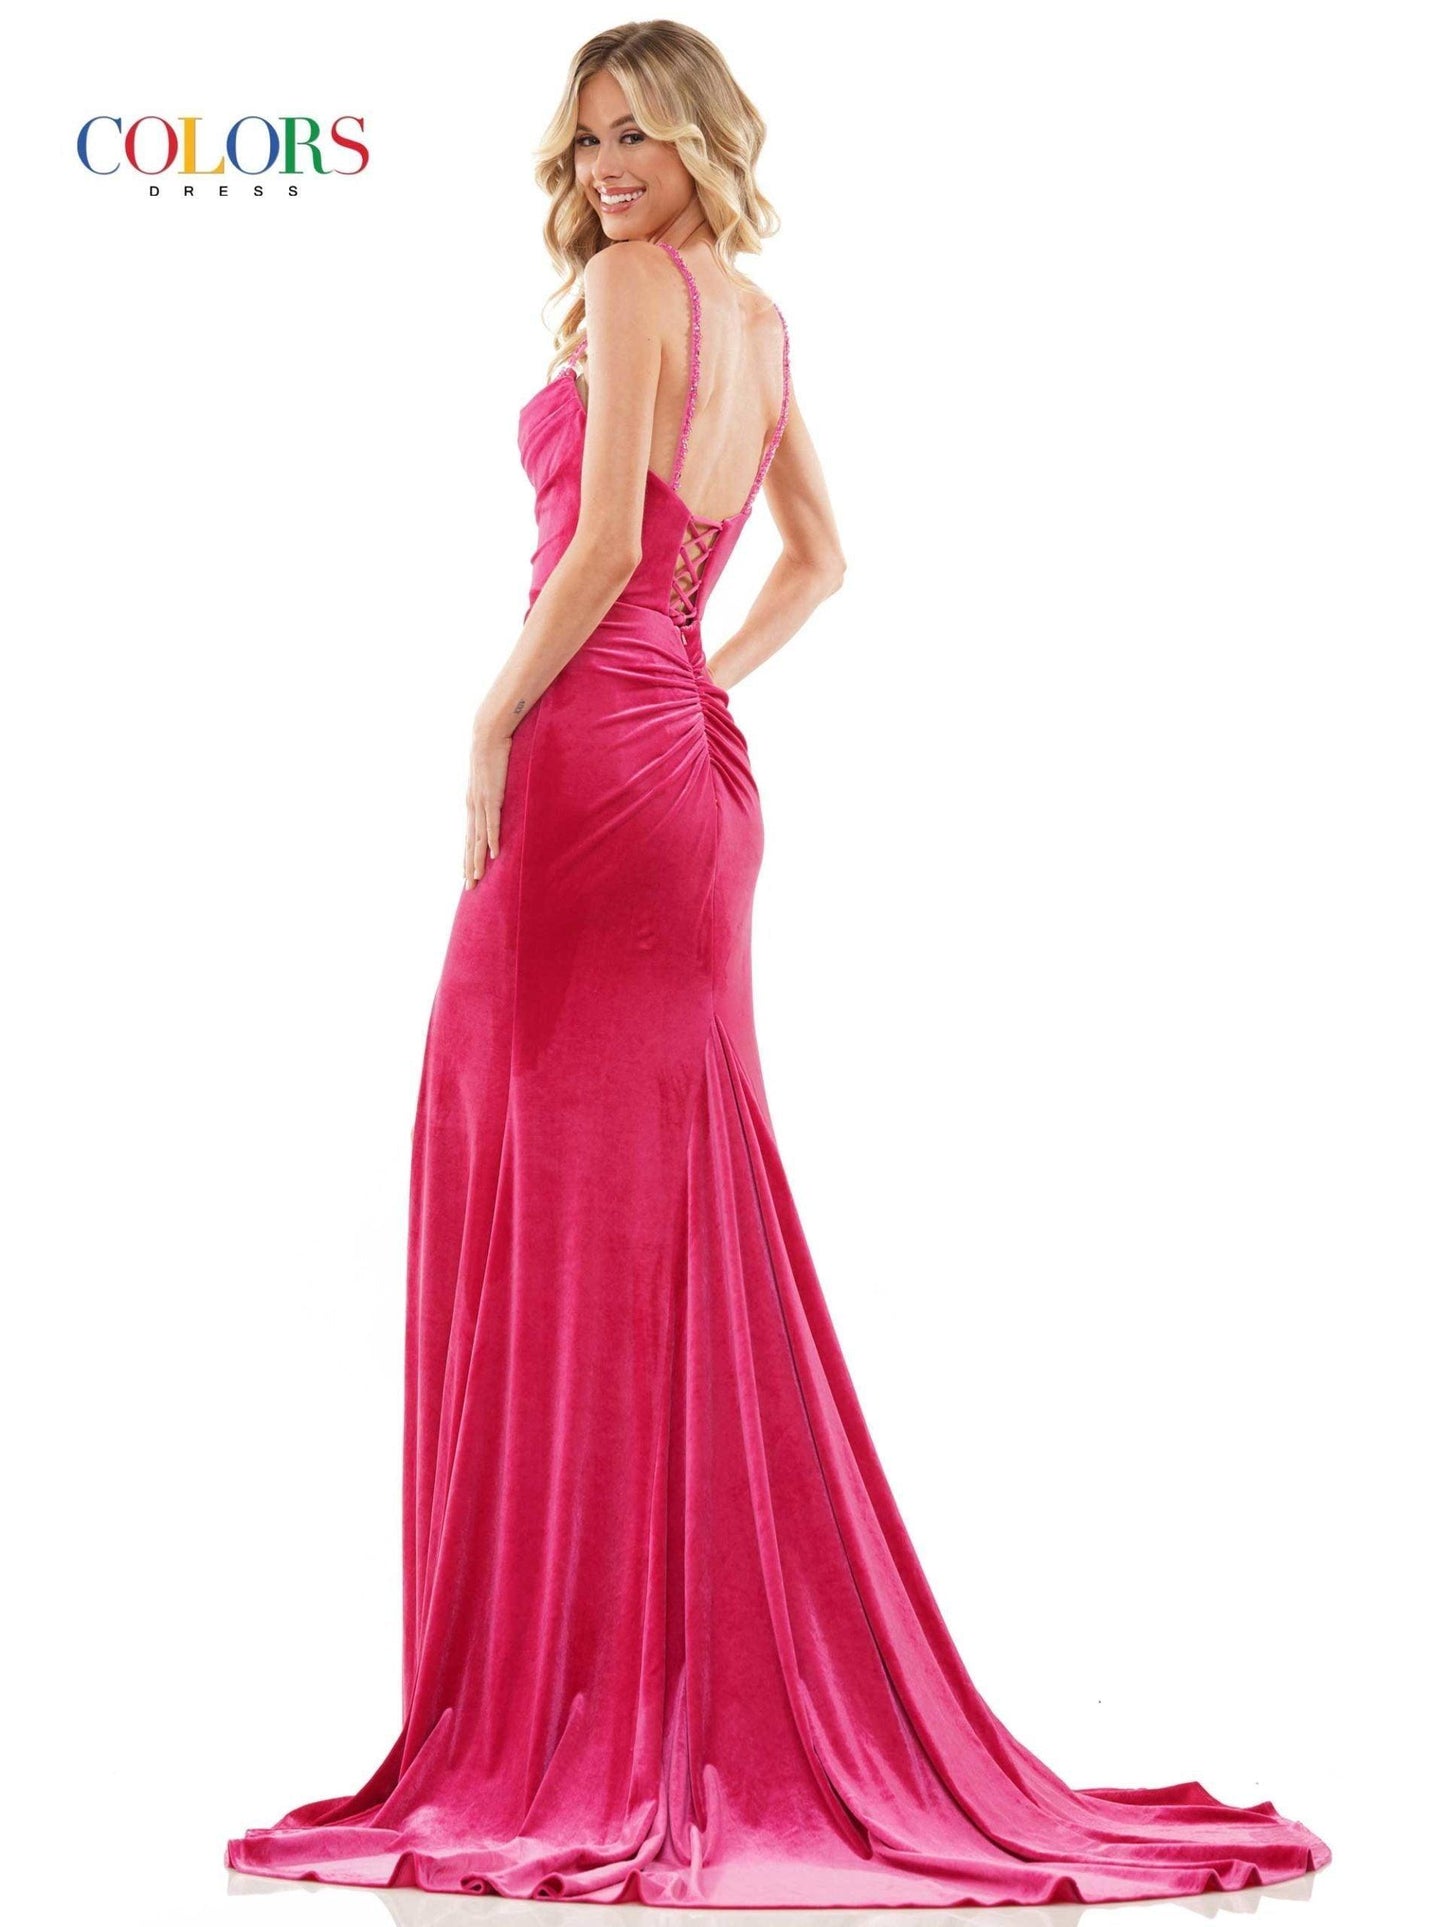 Colors Spaghetti Straps Long Prom Dress 2885 - The Dress Outlet